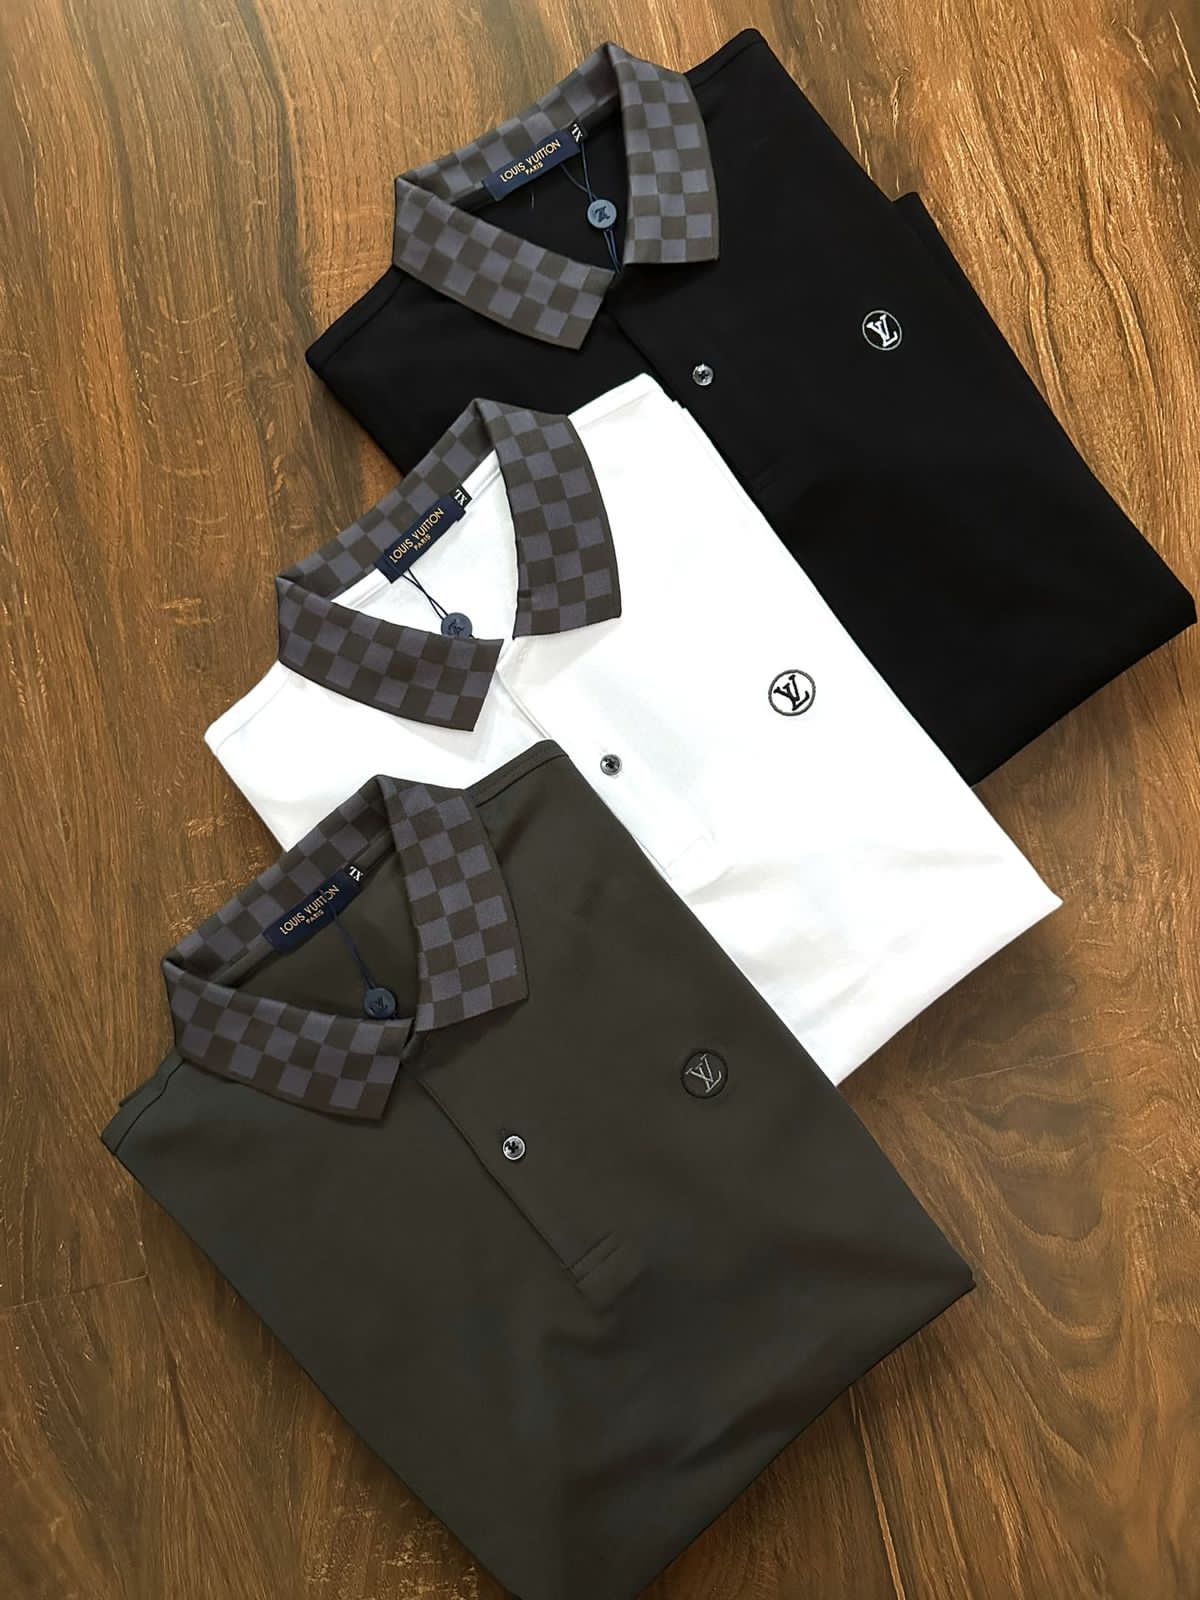 IMPORTED LOUIS VUITTON EXCLUSIVE POLOs IN STOCK 